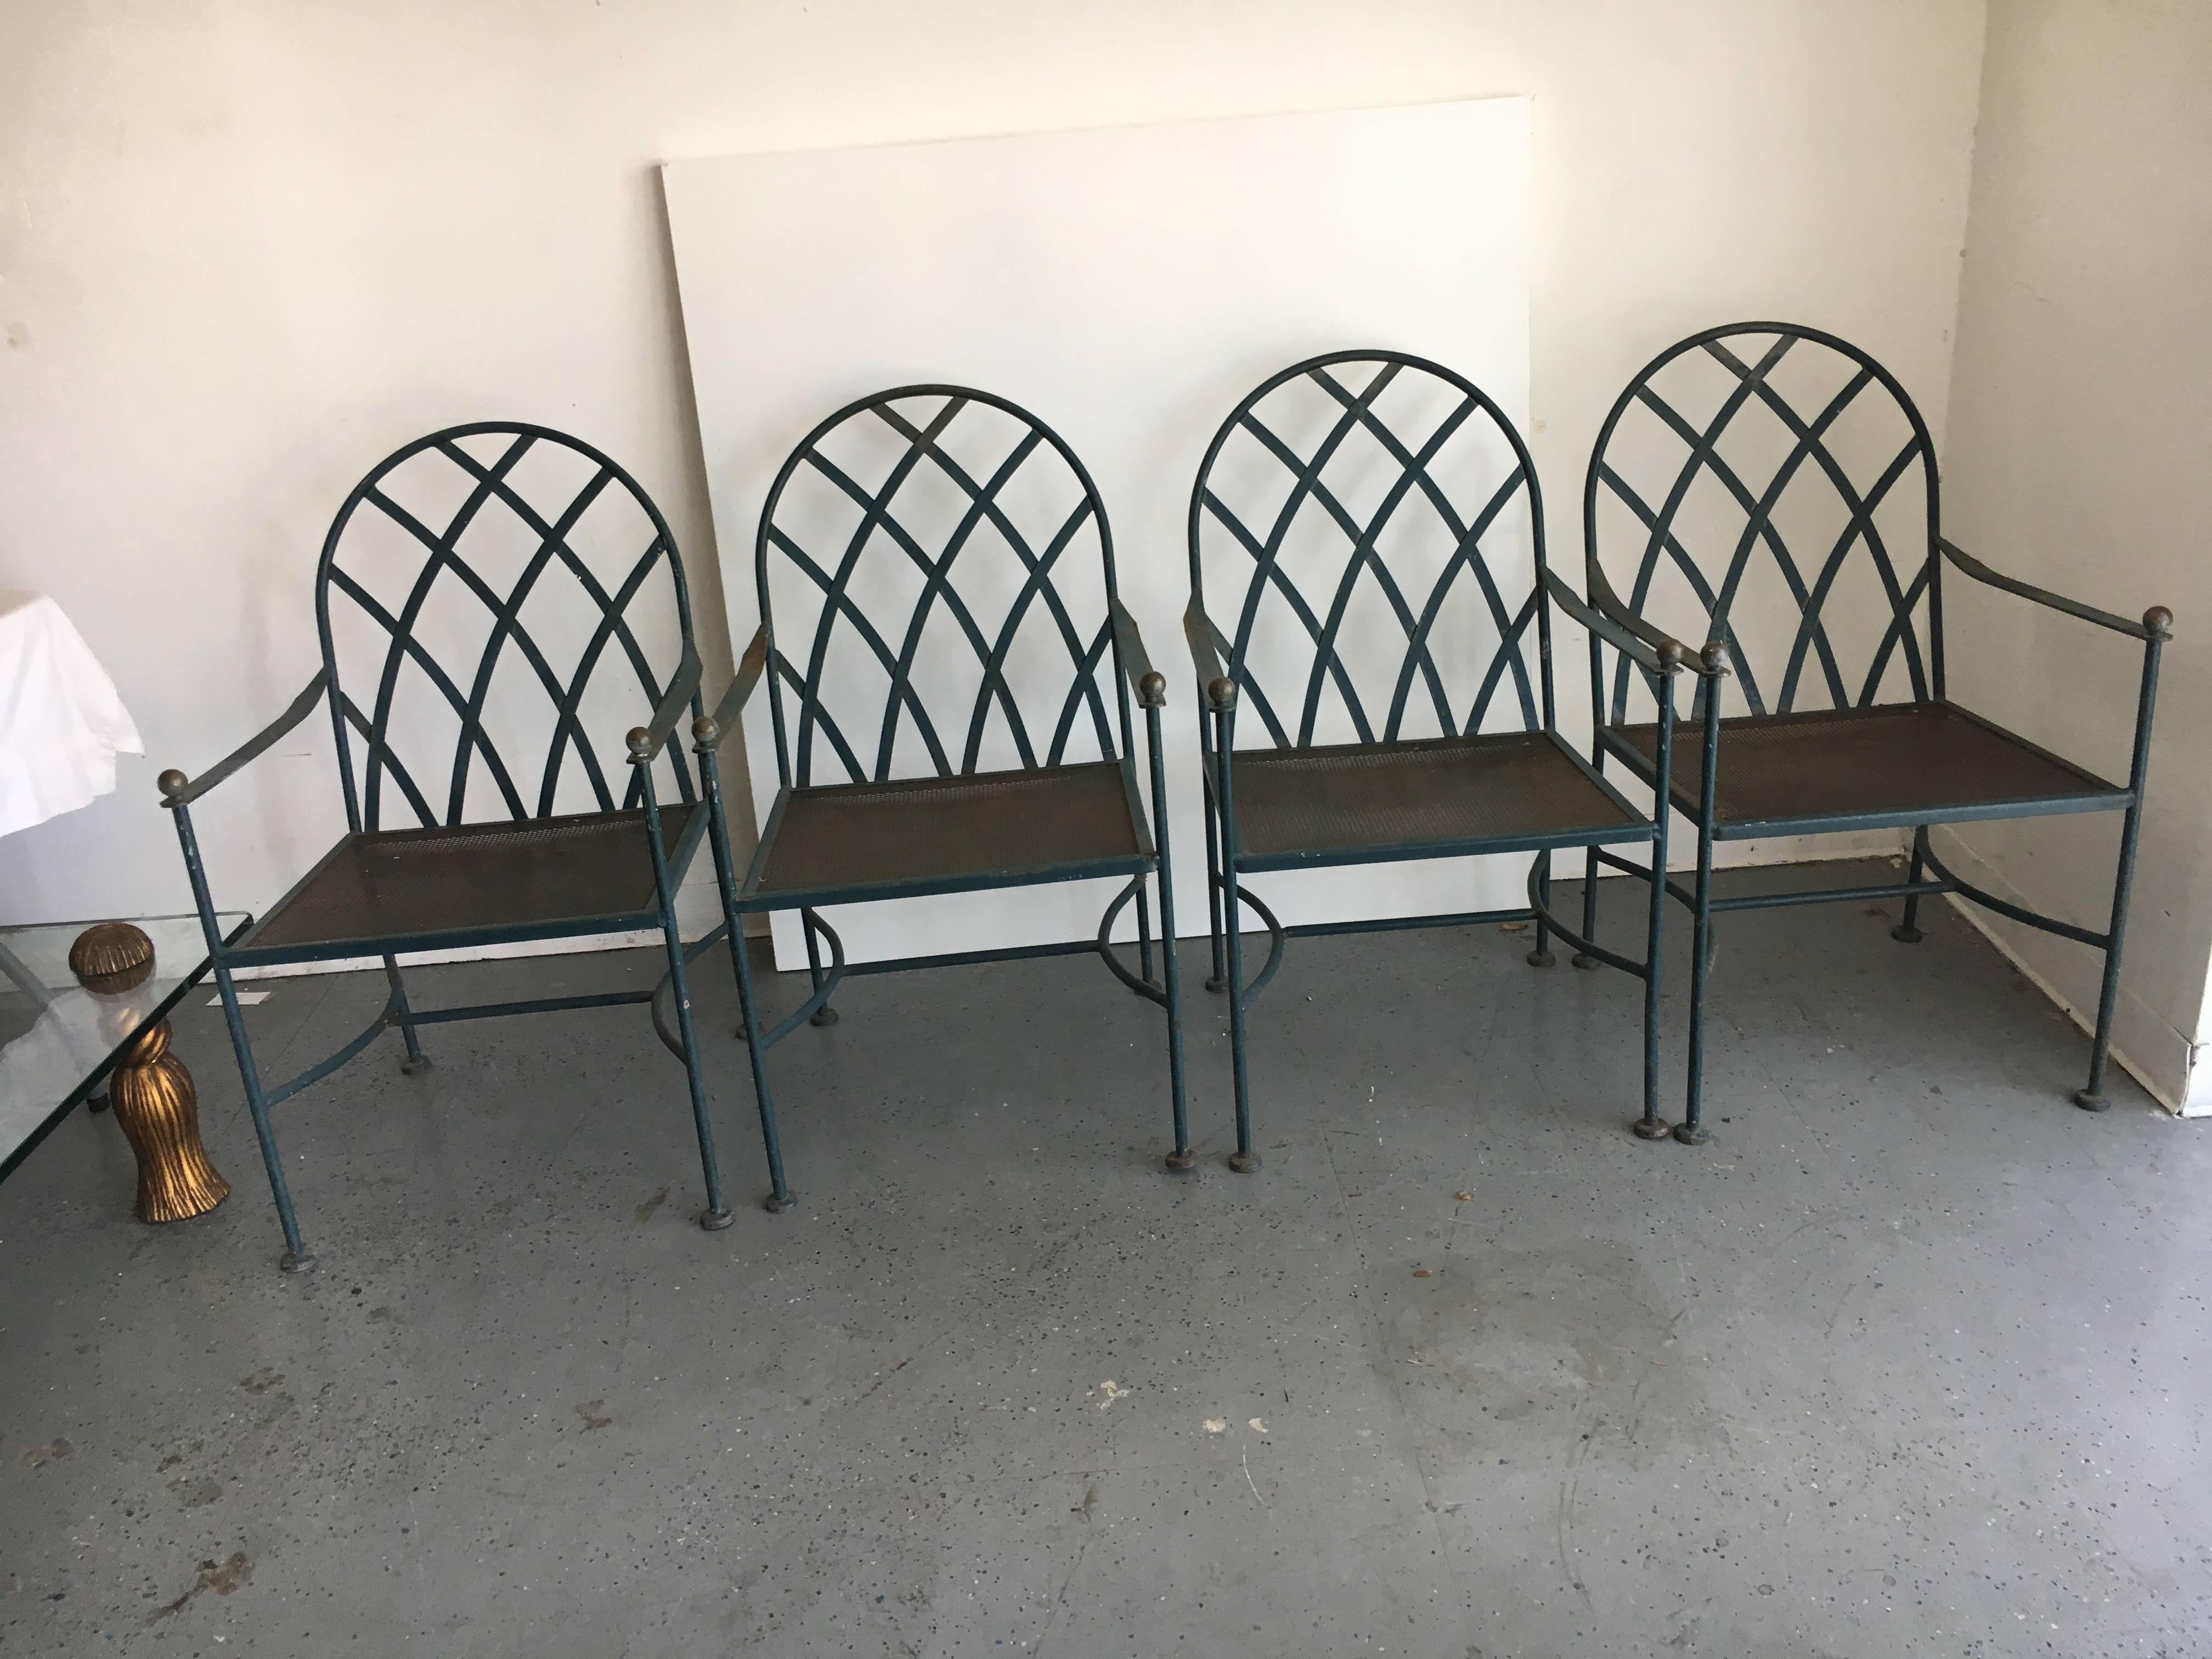 Vintage wrought iron outdoor patio dining set with four chairs, exceptional and handsome outdoor set with glass top, Mid-Century Modern. In keeping with the integrity of the era and piece, we have maintained the terrific patinated surface - each